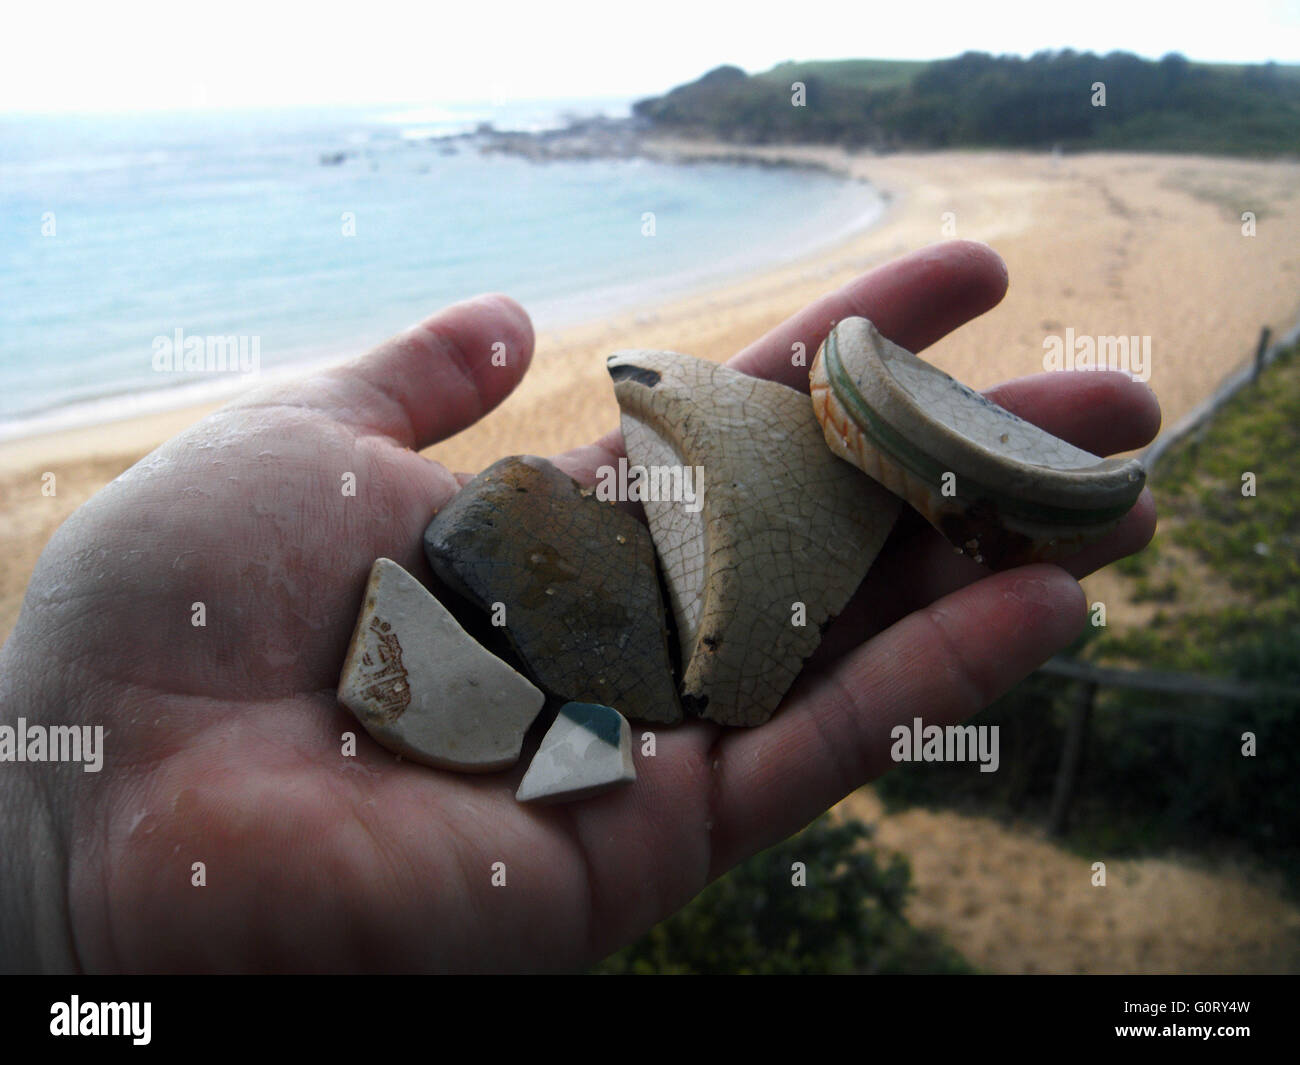 Sea pottery, broken pieces of ceramic worn by sea & sand, found on the beach at Little Bay, Sydney, NSW, Australia. No MR Stock Photo